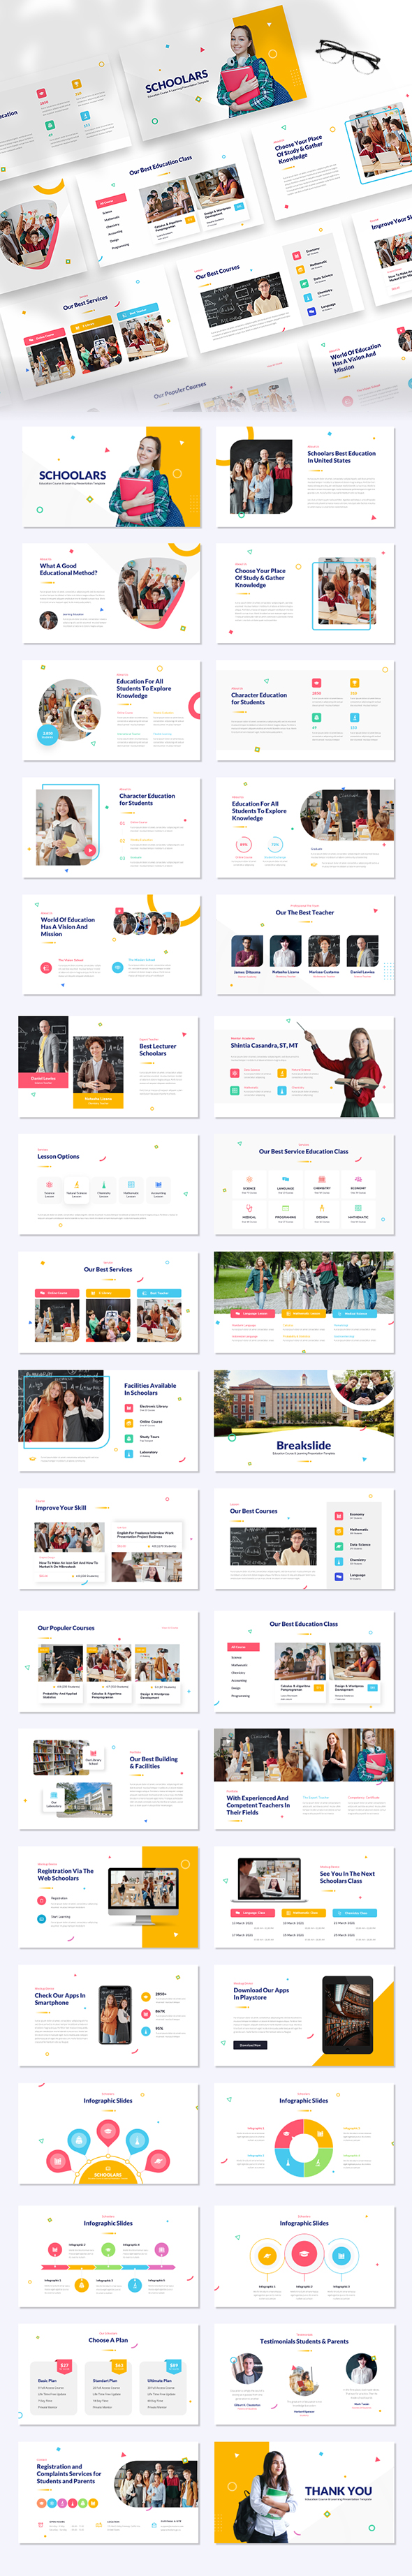 Schoolars – Education Course & Learning PowerPoint Template